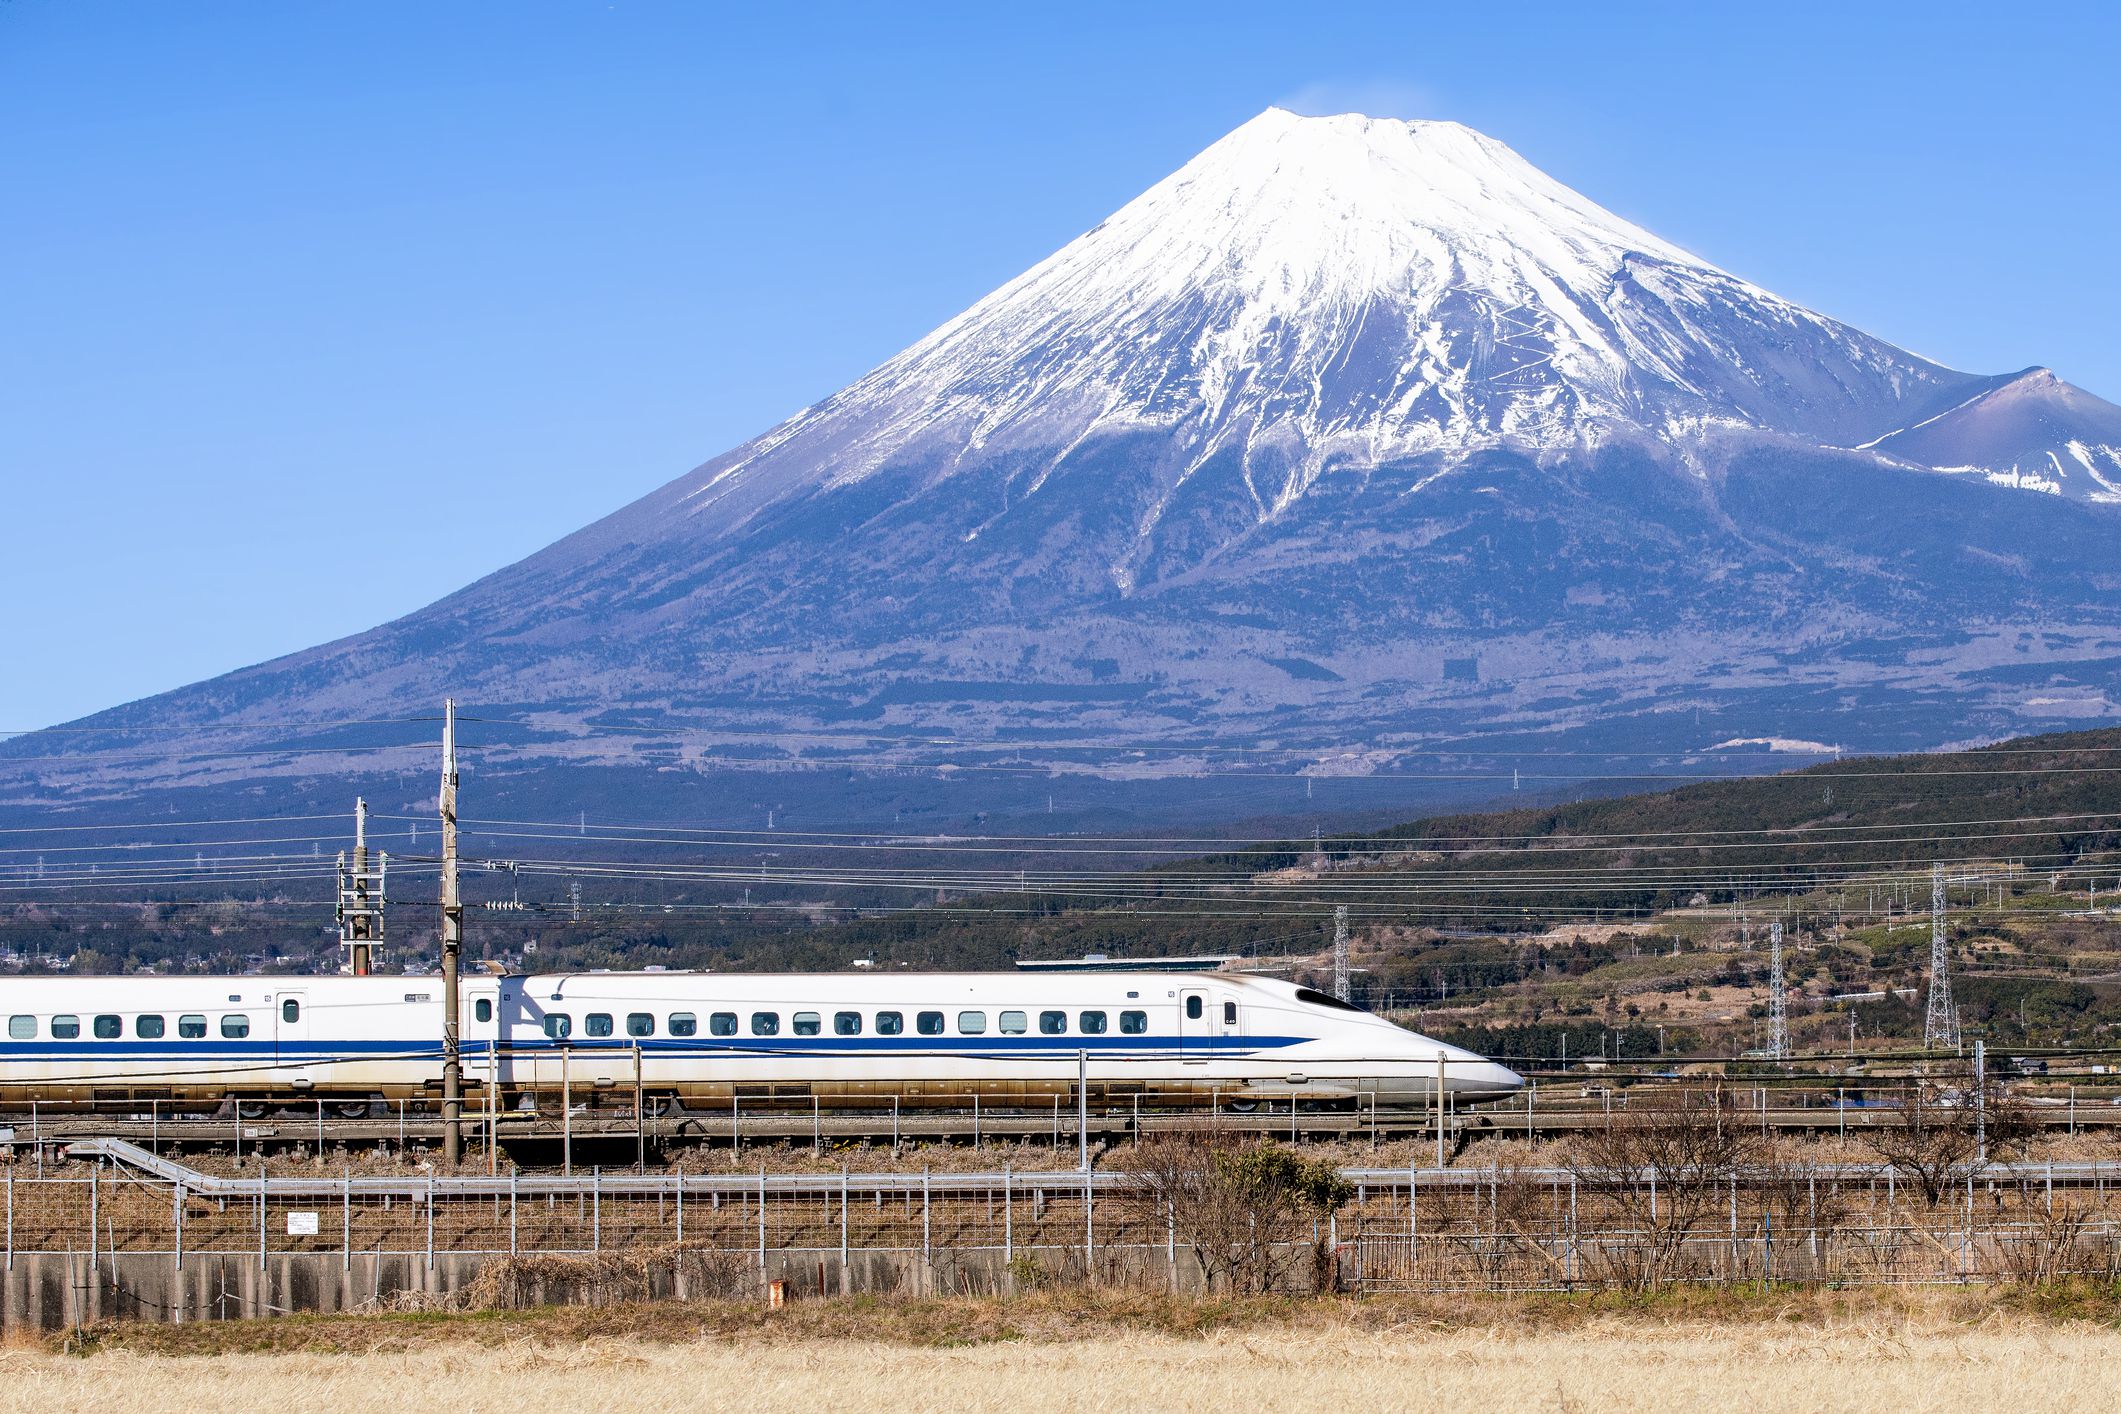 <p>Japan’s Shinkansen, or bullet train, is an experience in itself with a top speed of nearly 200 mph. But the journey becomes more special when you include sights along the way, such as Mount Fuji, Japan’s highest mountain and an active volcano.</p><p>If you’re traveling by train between Tokyo and Kyoto, consider your seating selection so you get the best view of Mount Fuji as you speed by. You want to be on the right side of the train car if you’re coming from Tokyo and the left side if you’re coming from Kyoto. Of course, it’s best to hope for a clear day so the massive mountain is visible.</p>